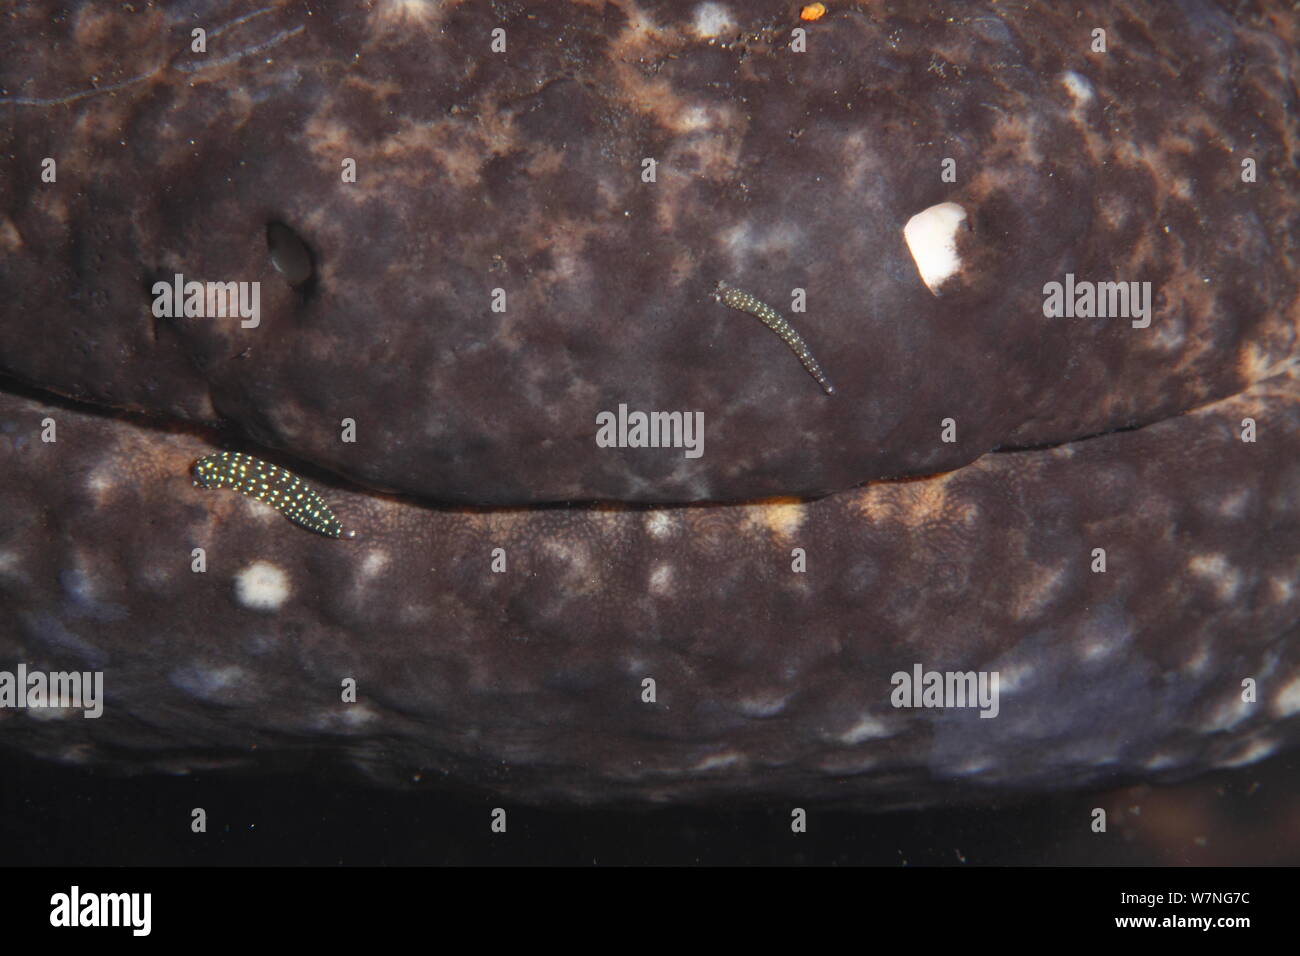 Close up of the mouth and nose of a Japanese giant salamander (Andrias japonicus) with two Leeches (Hirudinea) attached, Japan, March Stock Photo